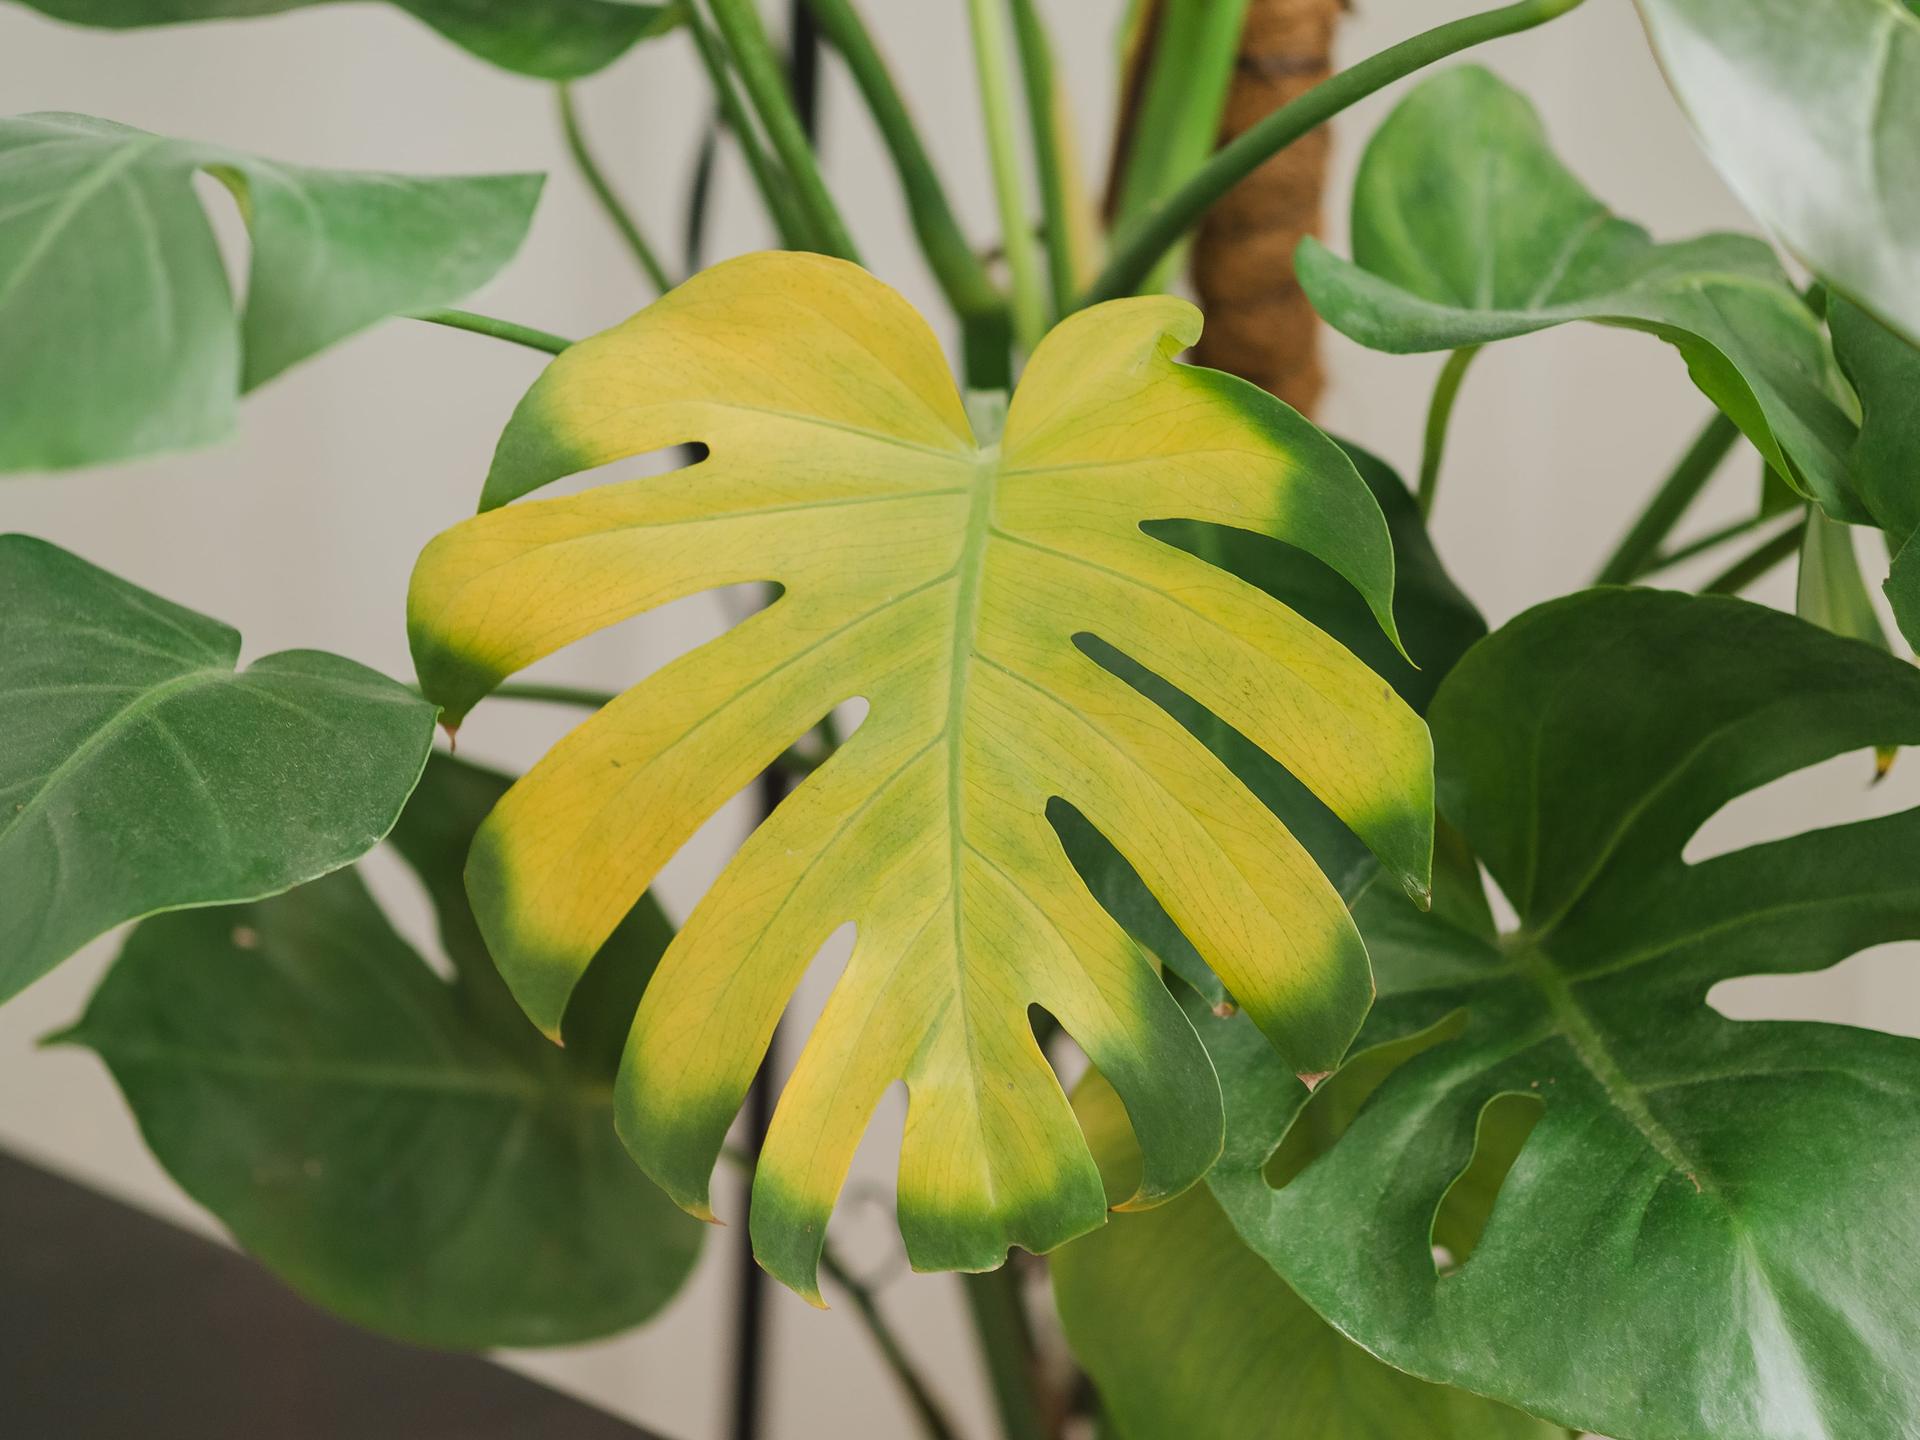 Swiss Cheese Plant (Monstera deliciosa) Leaf Turning Yellow